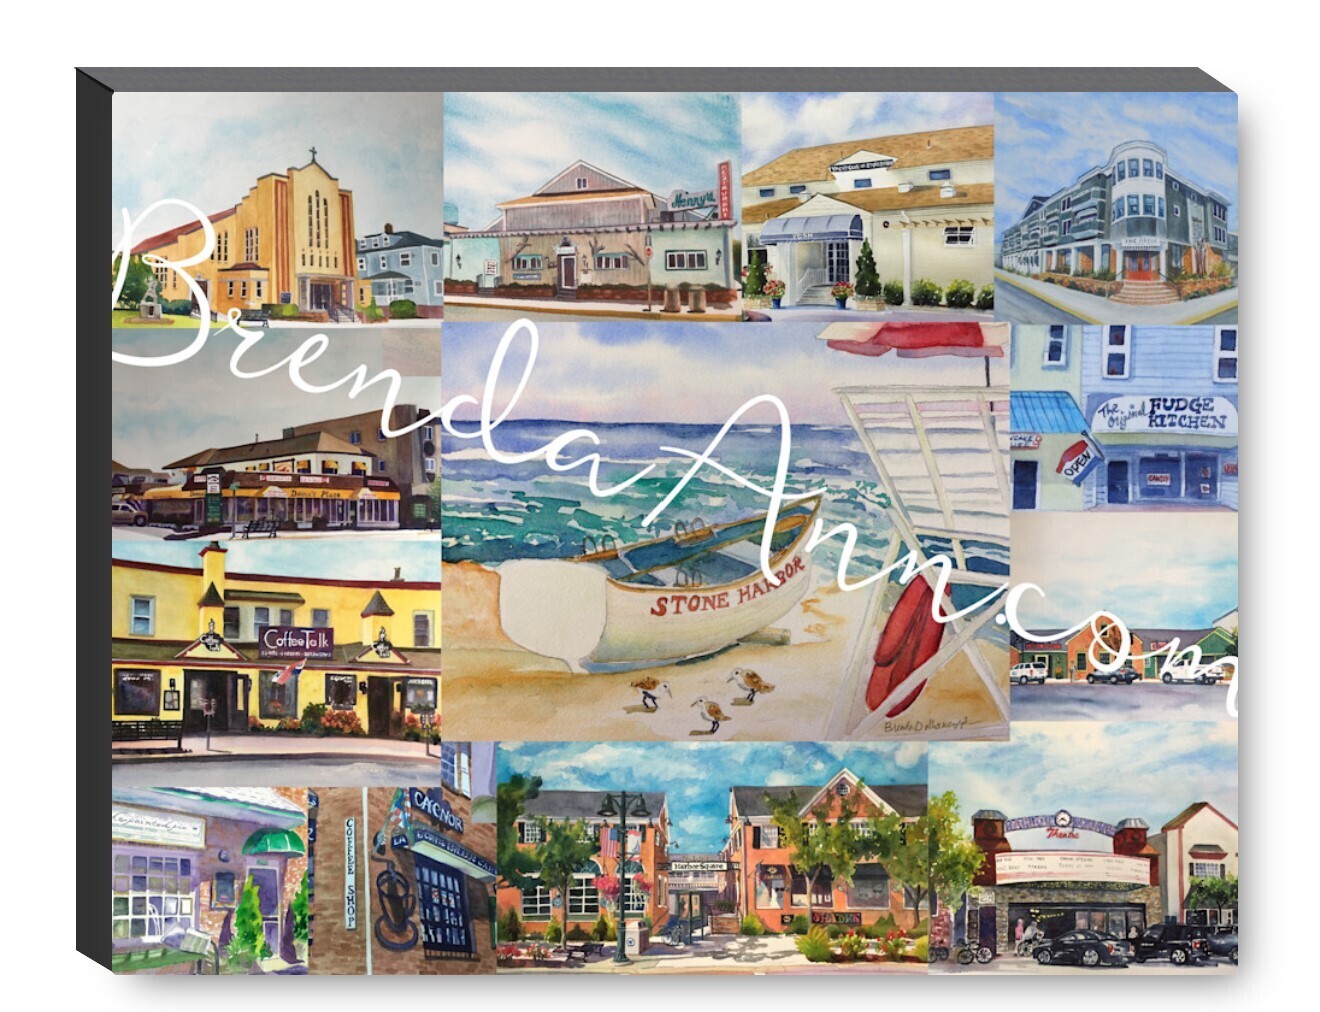 Stone Harbor NJ Collage Canvas Gallery Wrapped Print - Watercolor Art - Ready to hang on a wall